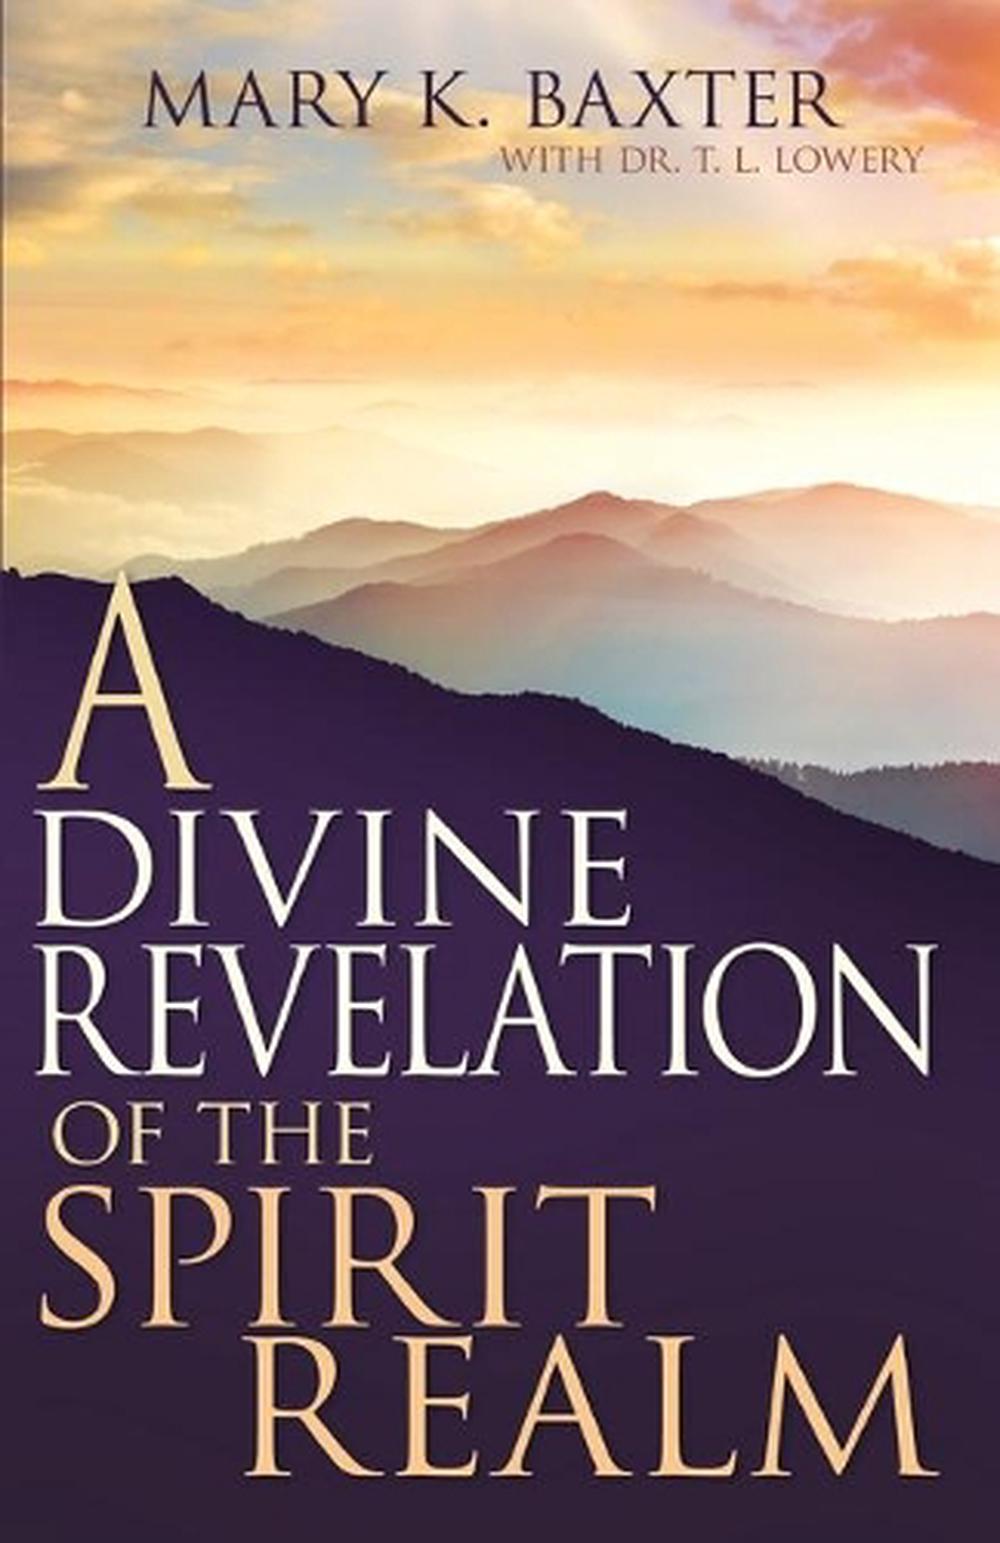 A　at　K.　Paperback,　Buy　Mary　Divine　Revelation　by　of　the　9780883686232　Spirit　Nile　Realm　Baxter,　online　The